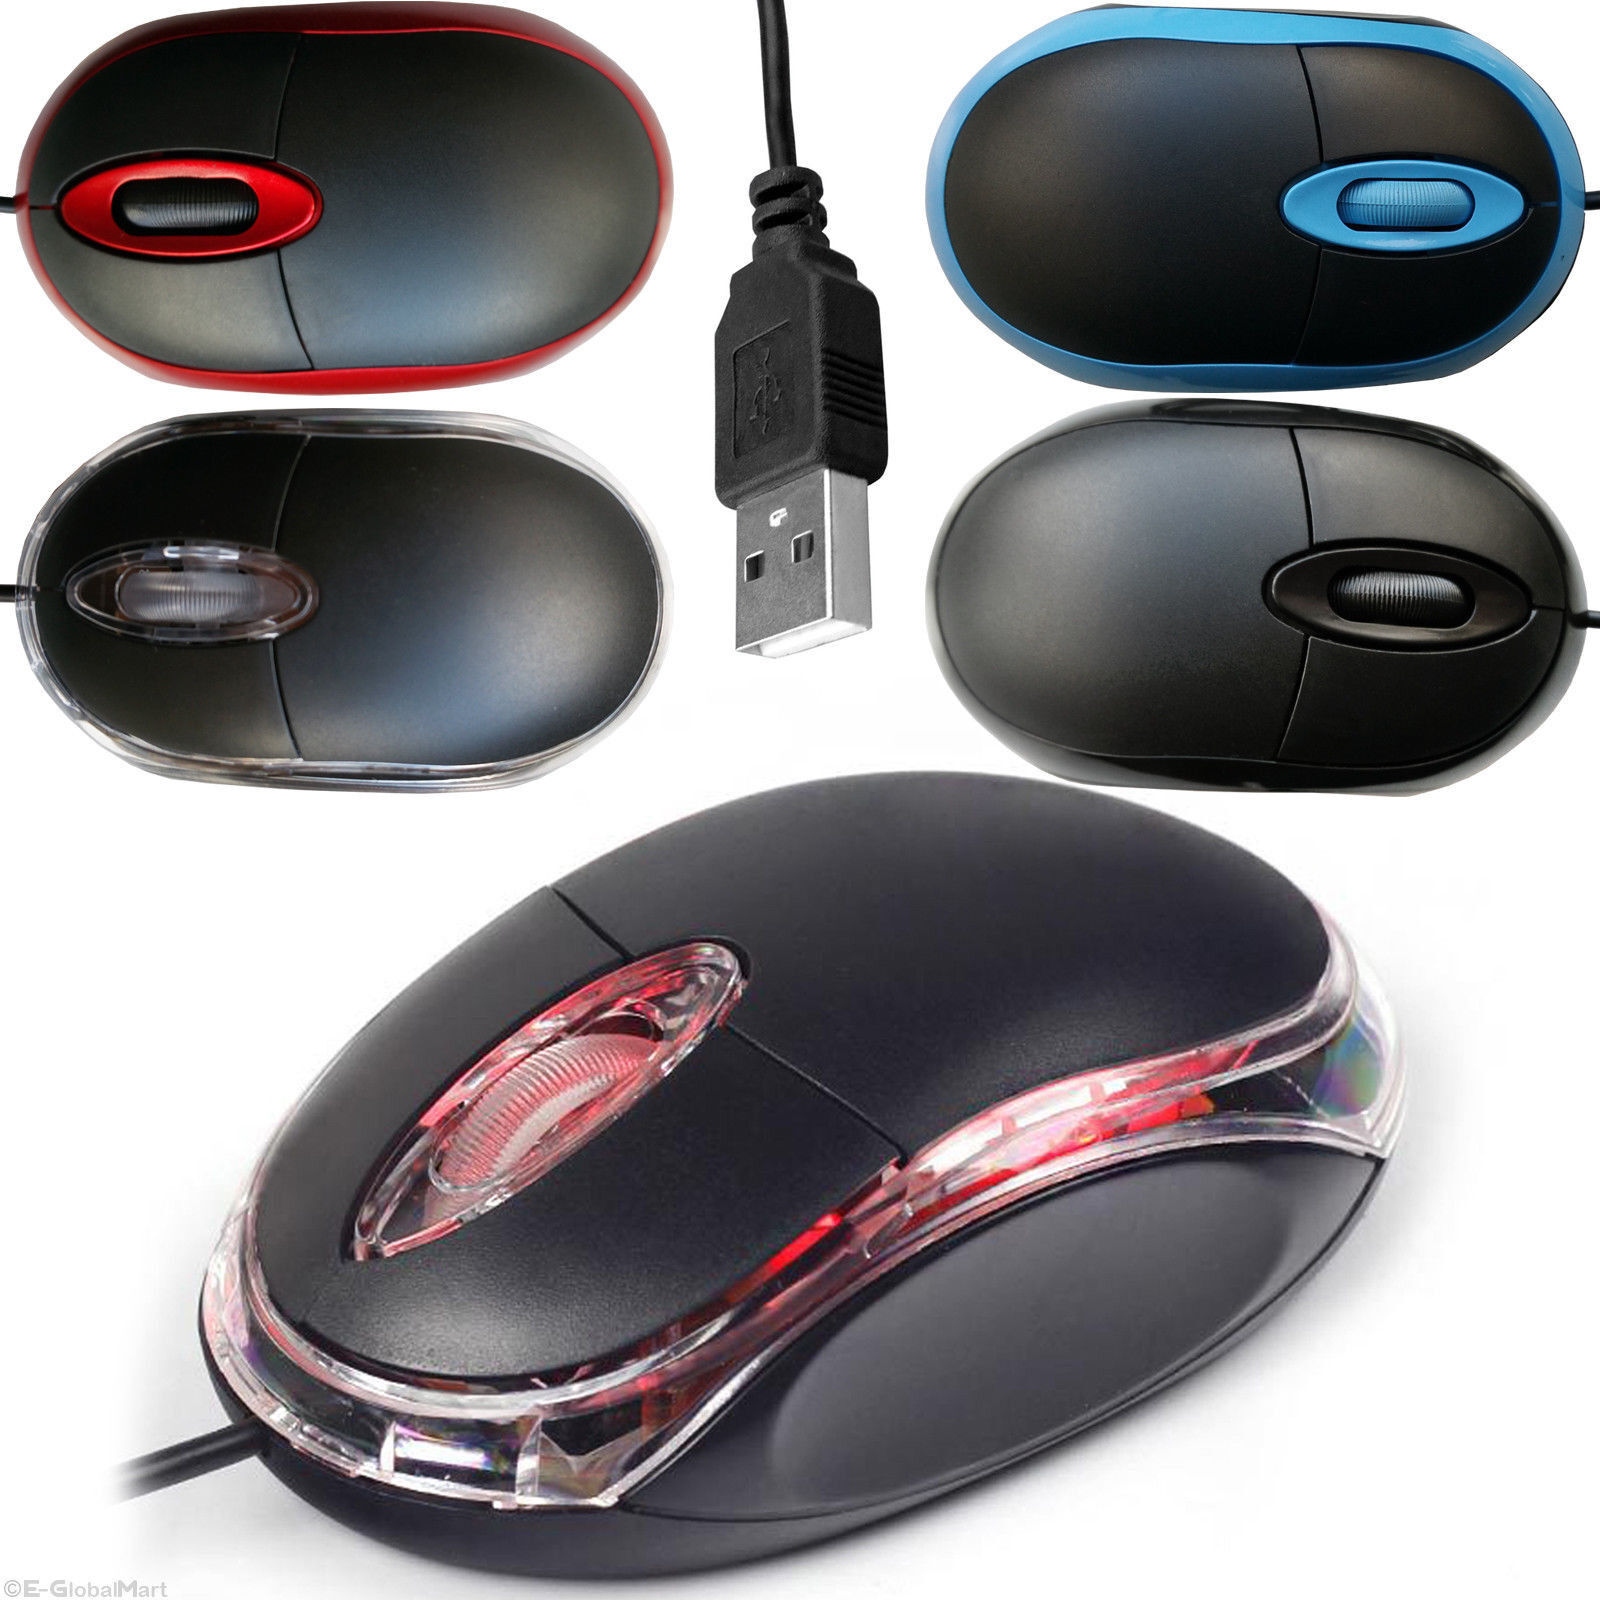 USB Wired Optical Scroll Mouse Mice For PC Computer Laptop Windows XP 7 8 10 UK